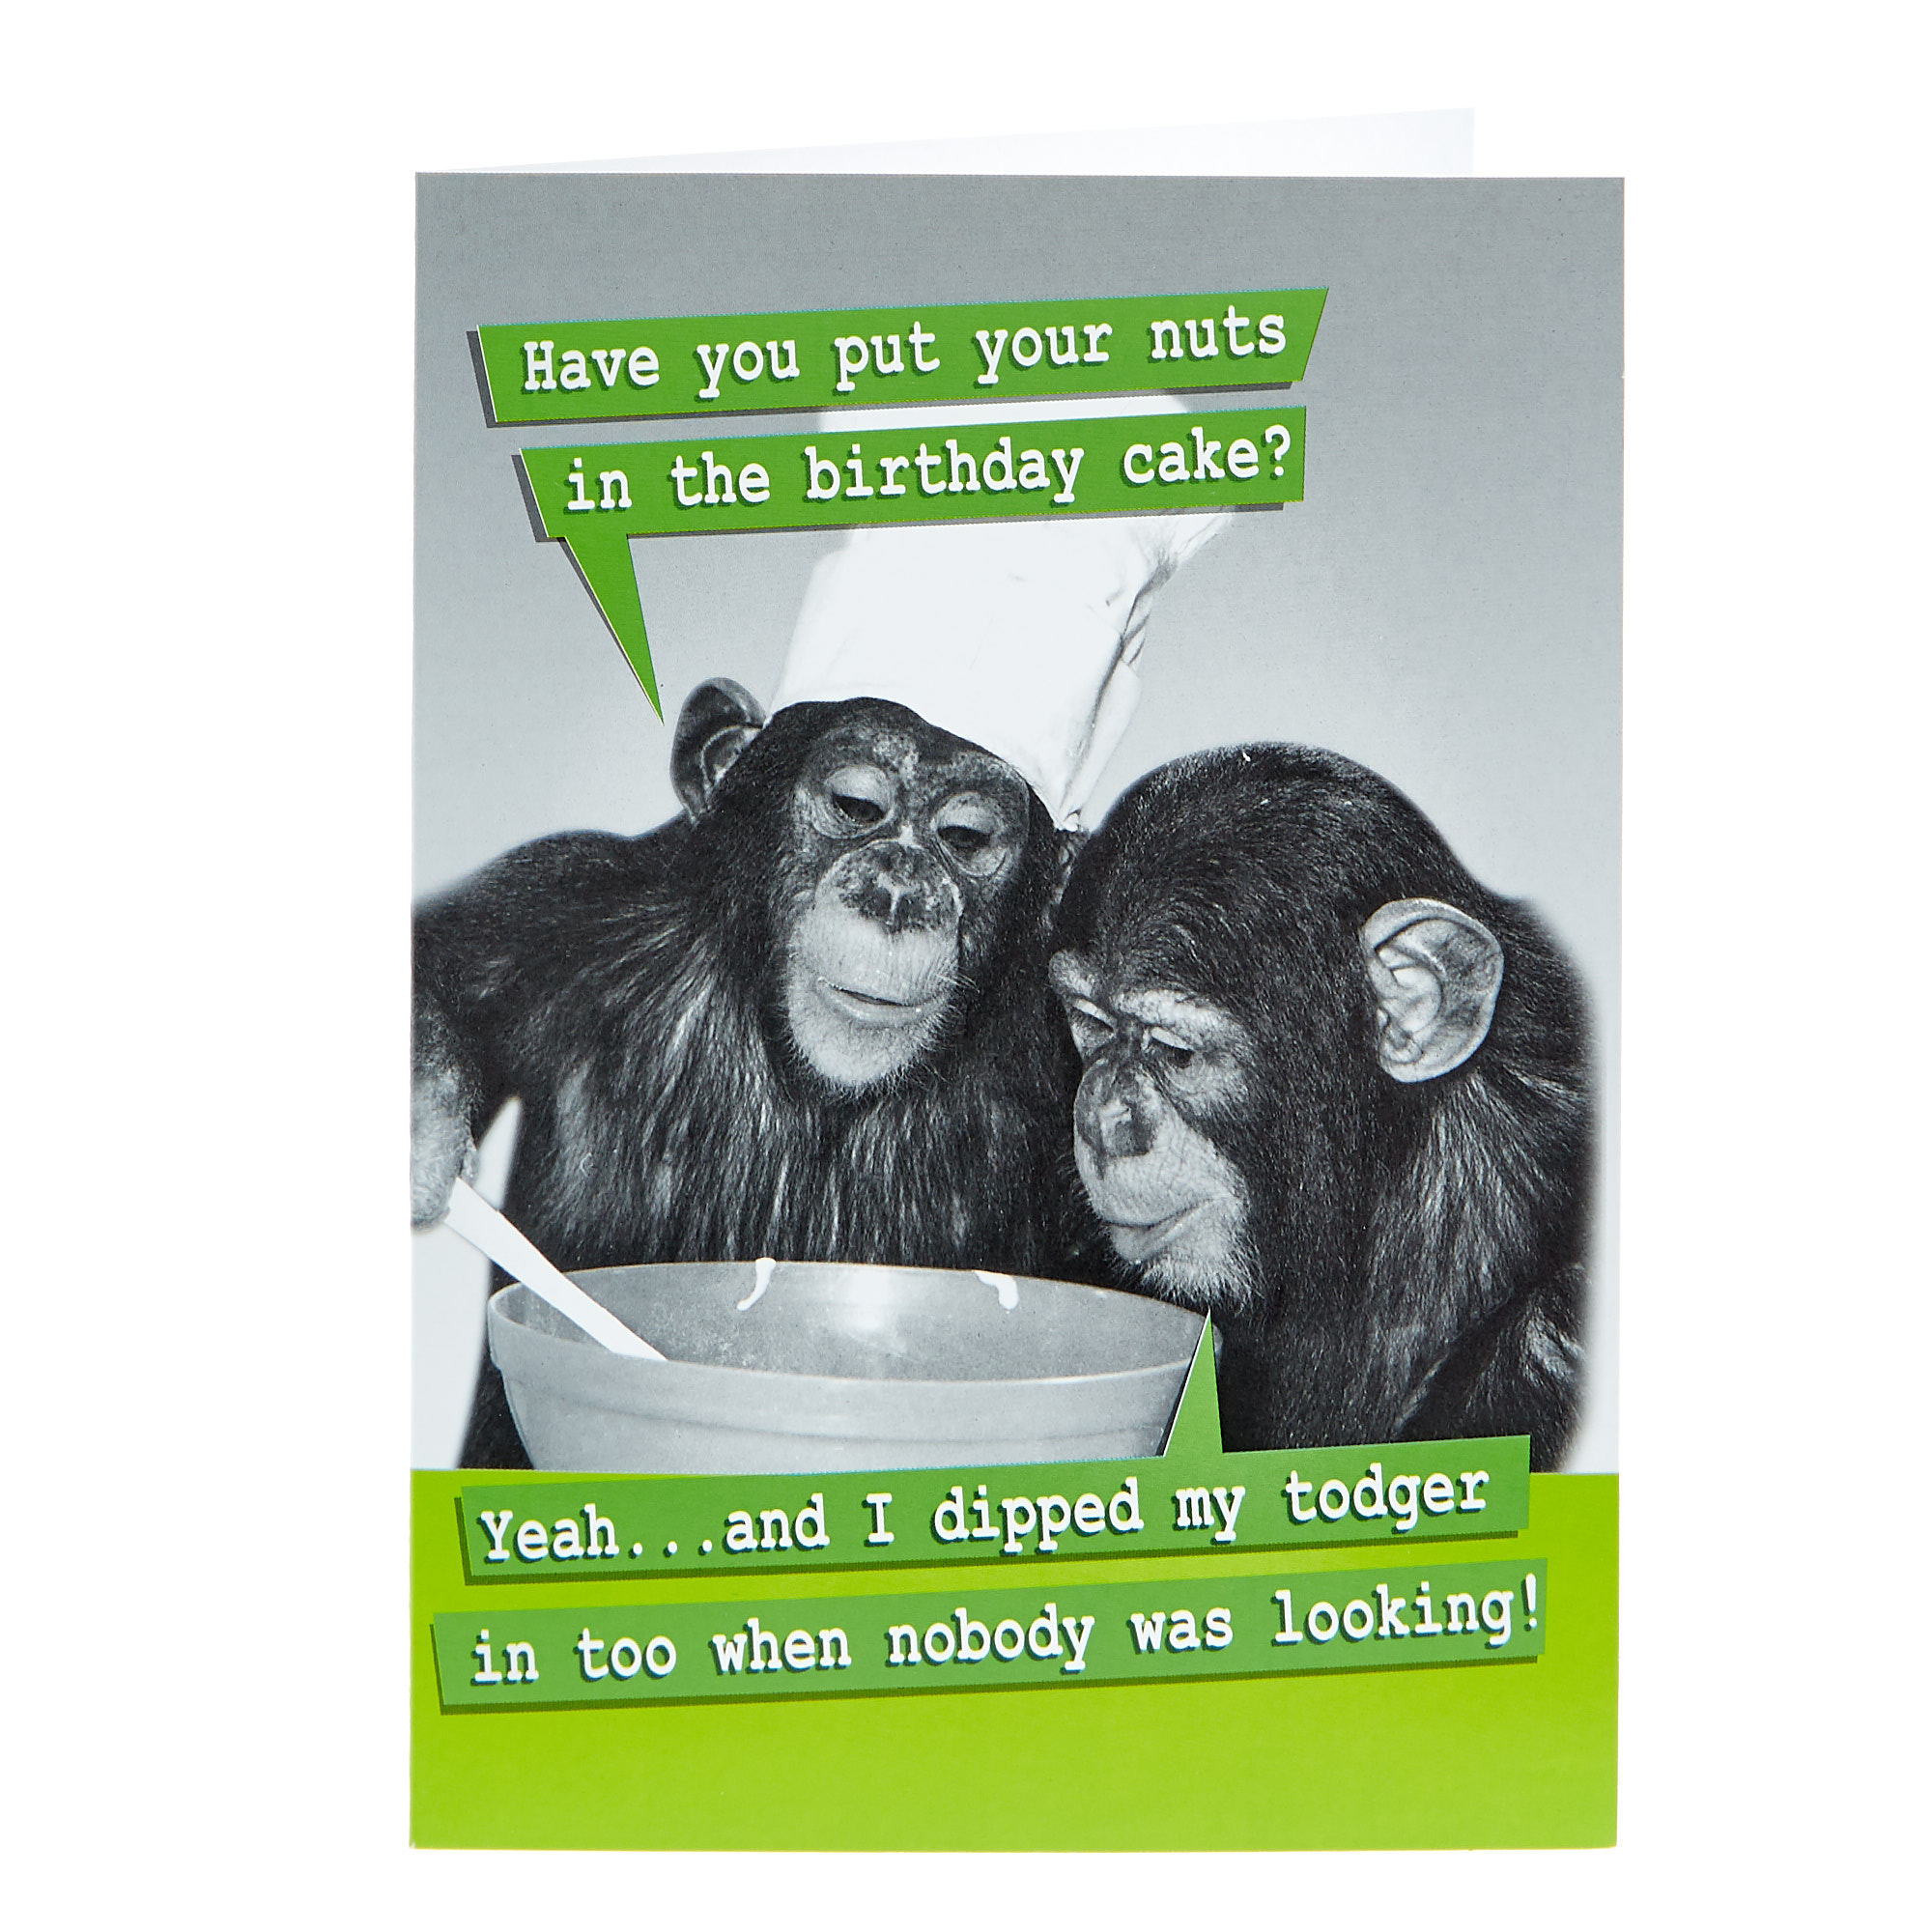 Buy Birthday Card - Nuts In The Birthday Cake for GBP 1.49 | Card ...